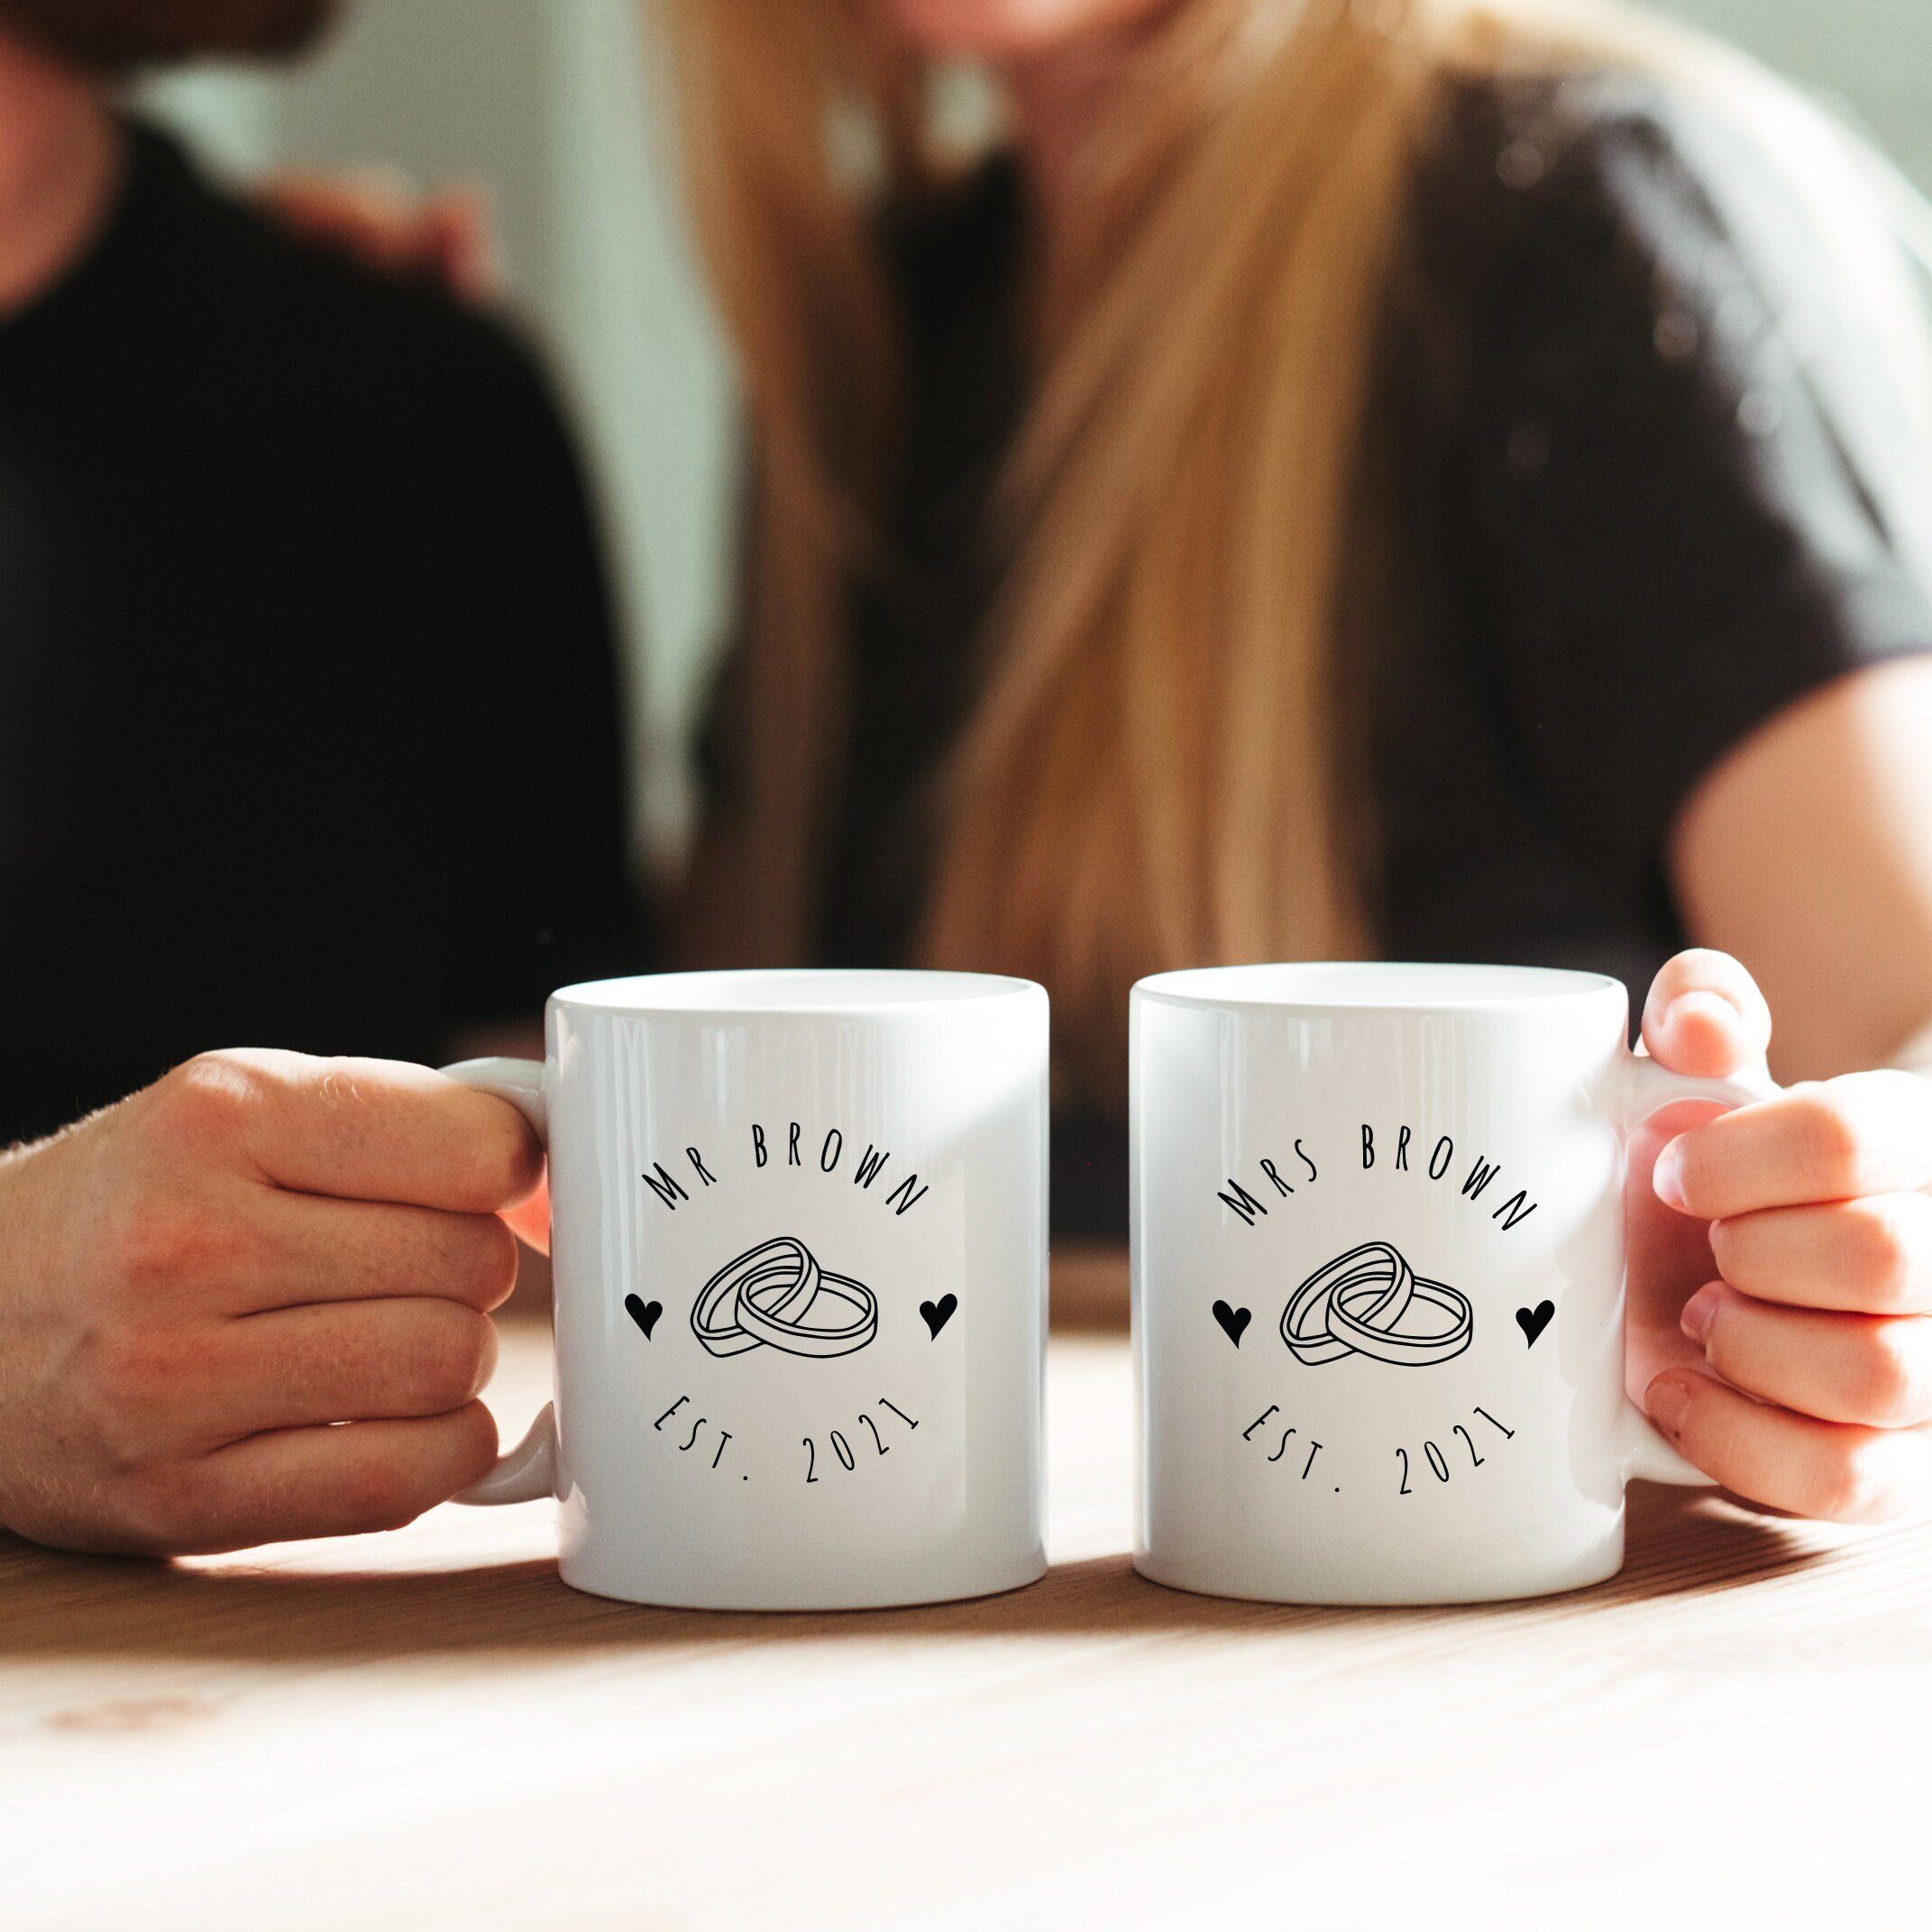 Personalised Mr & Mrs wedding mug, Bride and groom mugs, Engagement gifts for couples